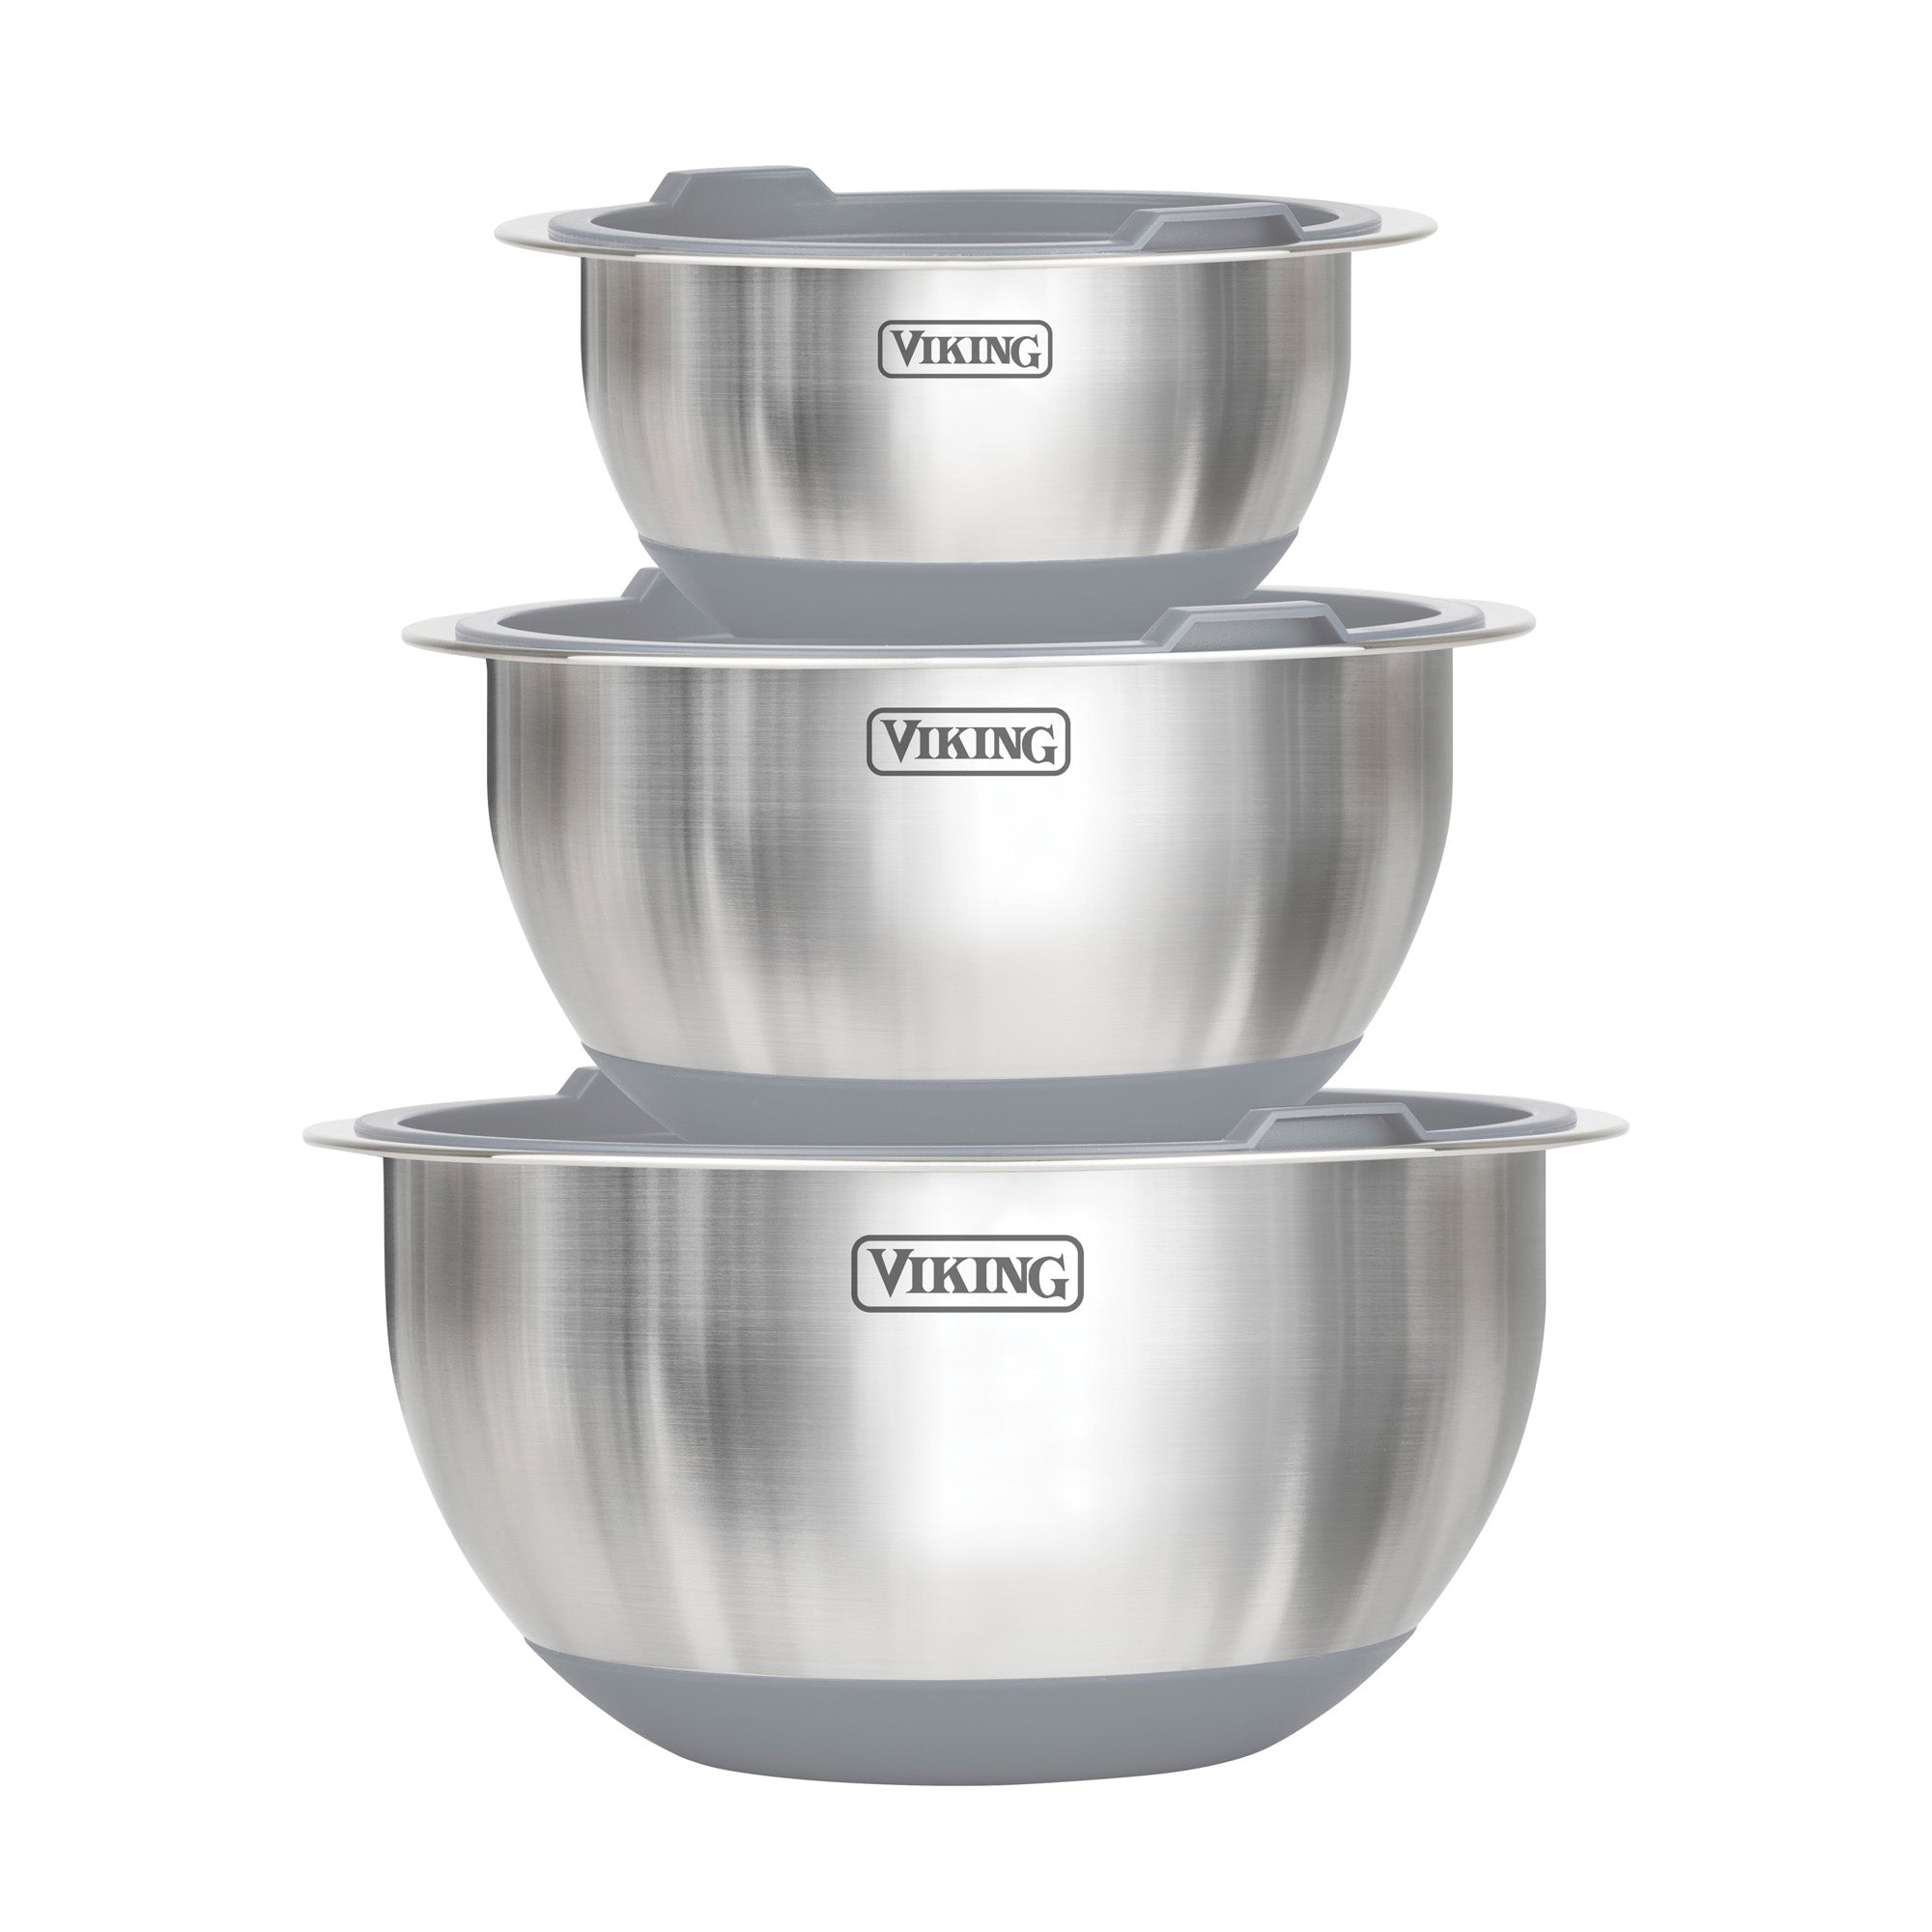 8 Qt. Economy Stainless Steel Mixing Bowl in Mixing Bowls from